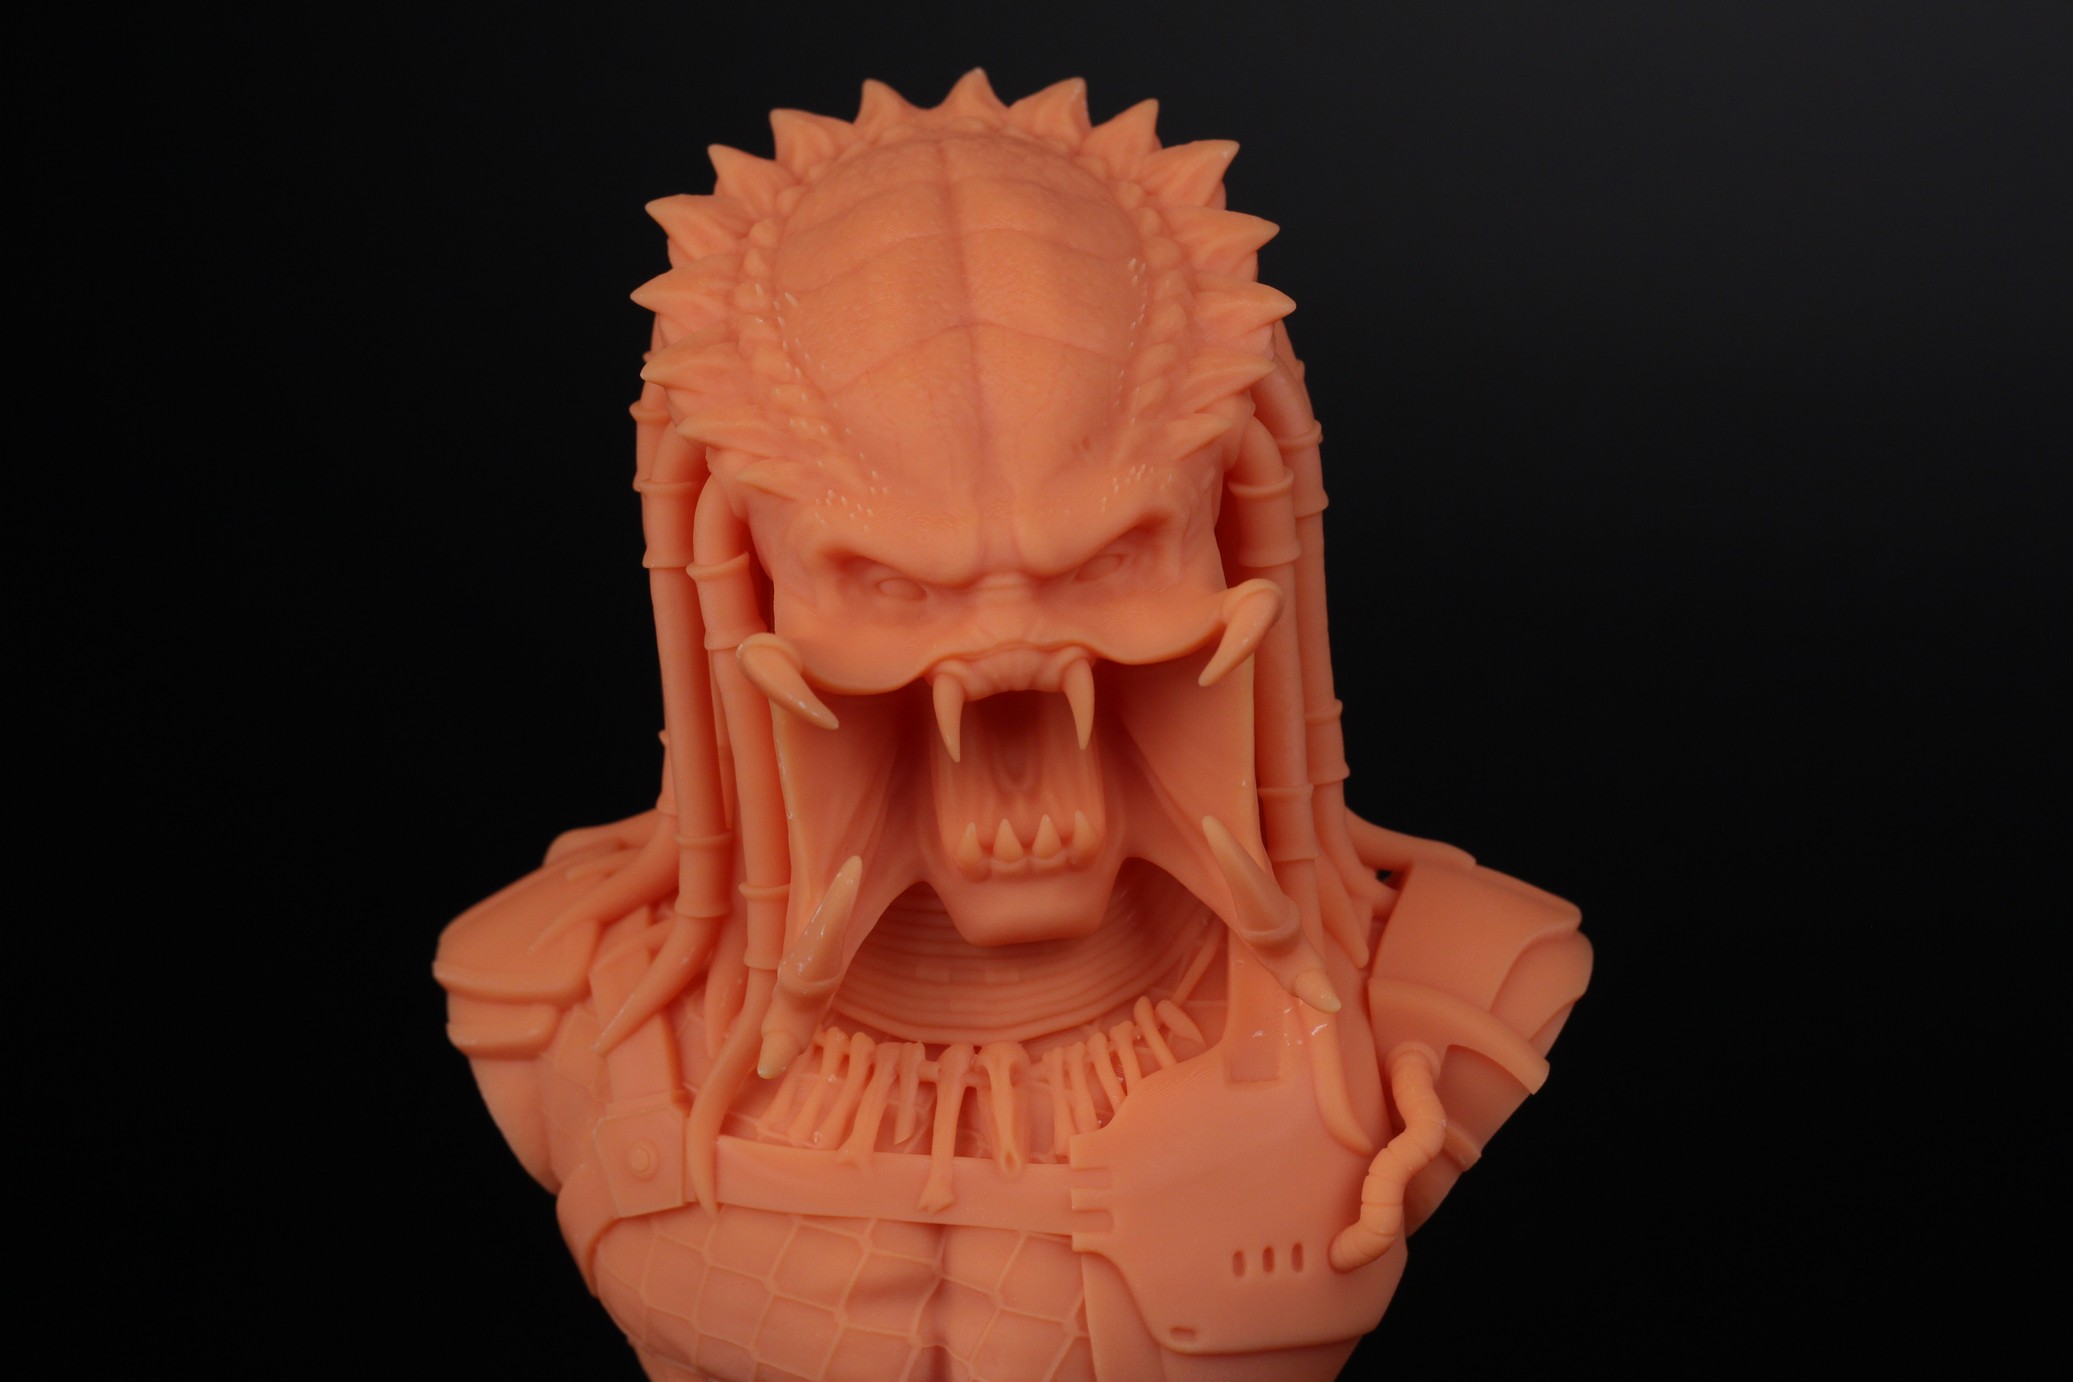 Predator Bust Anycubic Photon M3 Max Review 1 | Anycubic Photon M3 Max Review: Who Needs FDM Anymore?